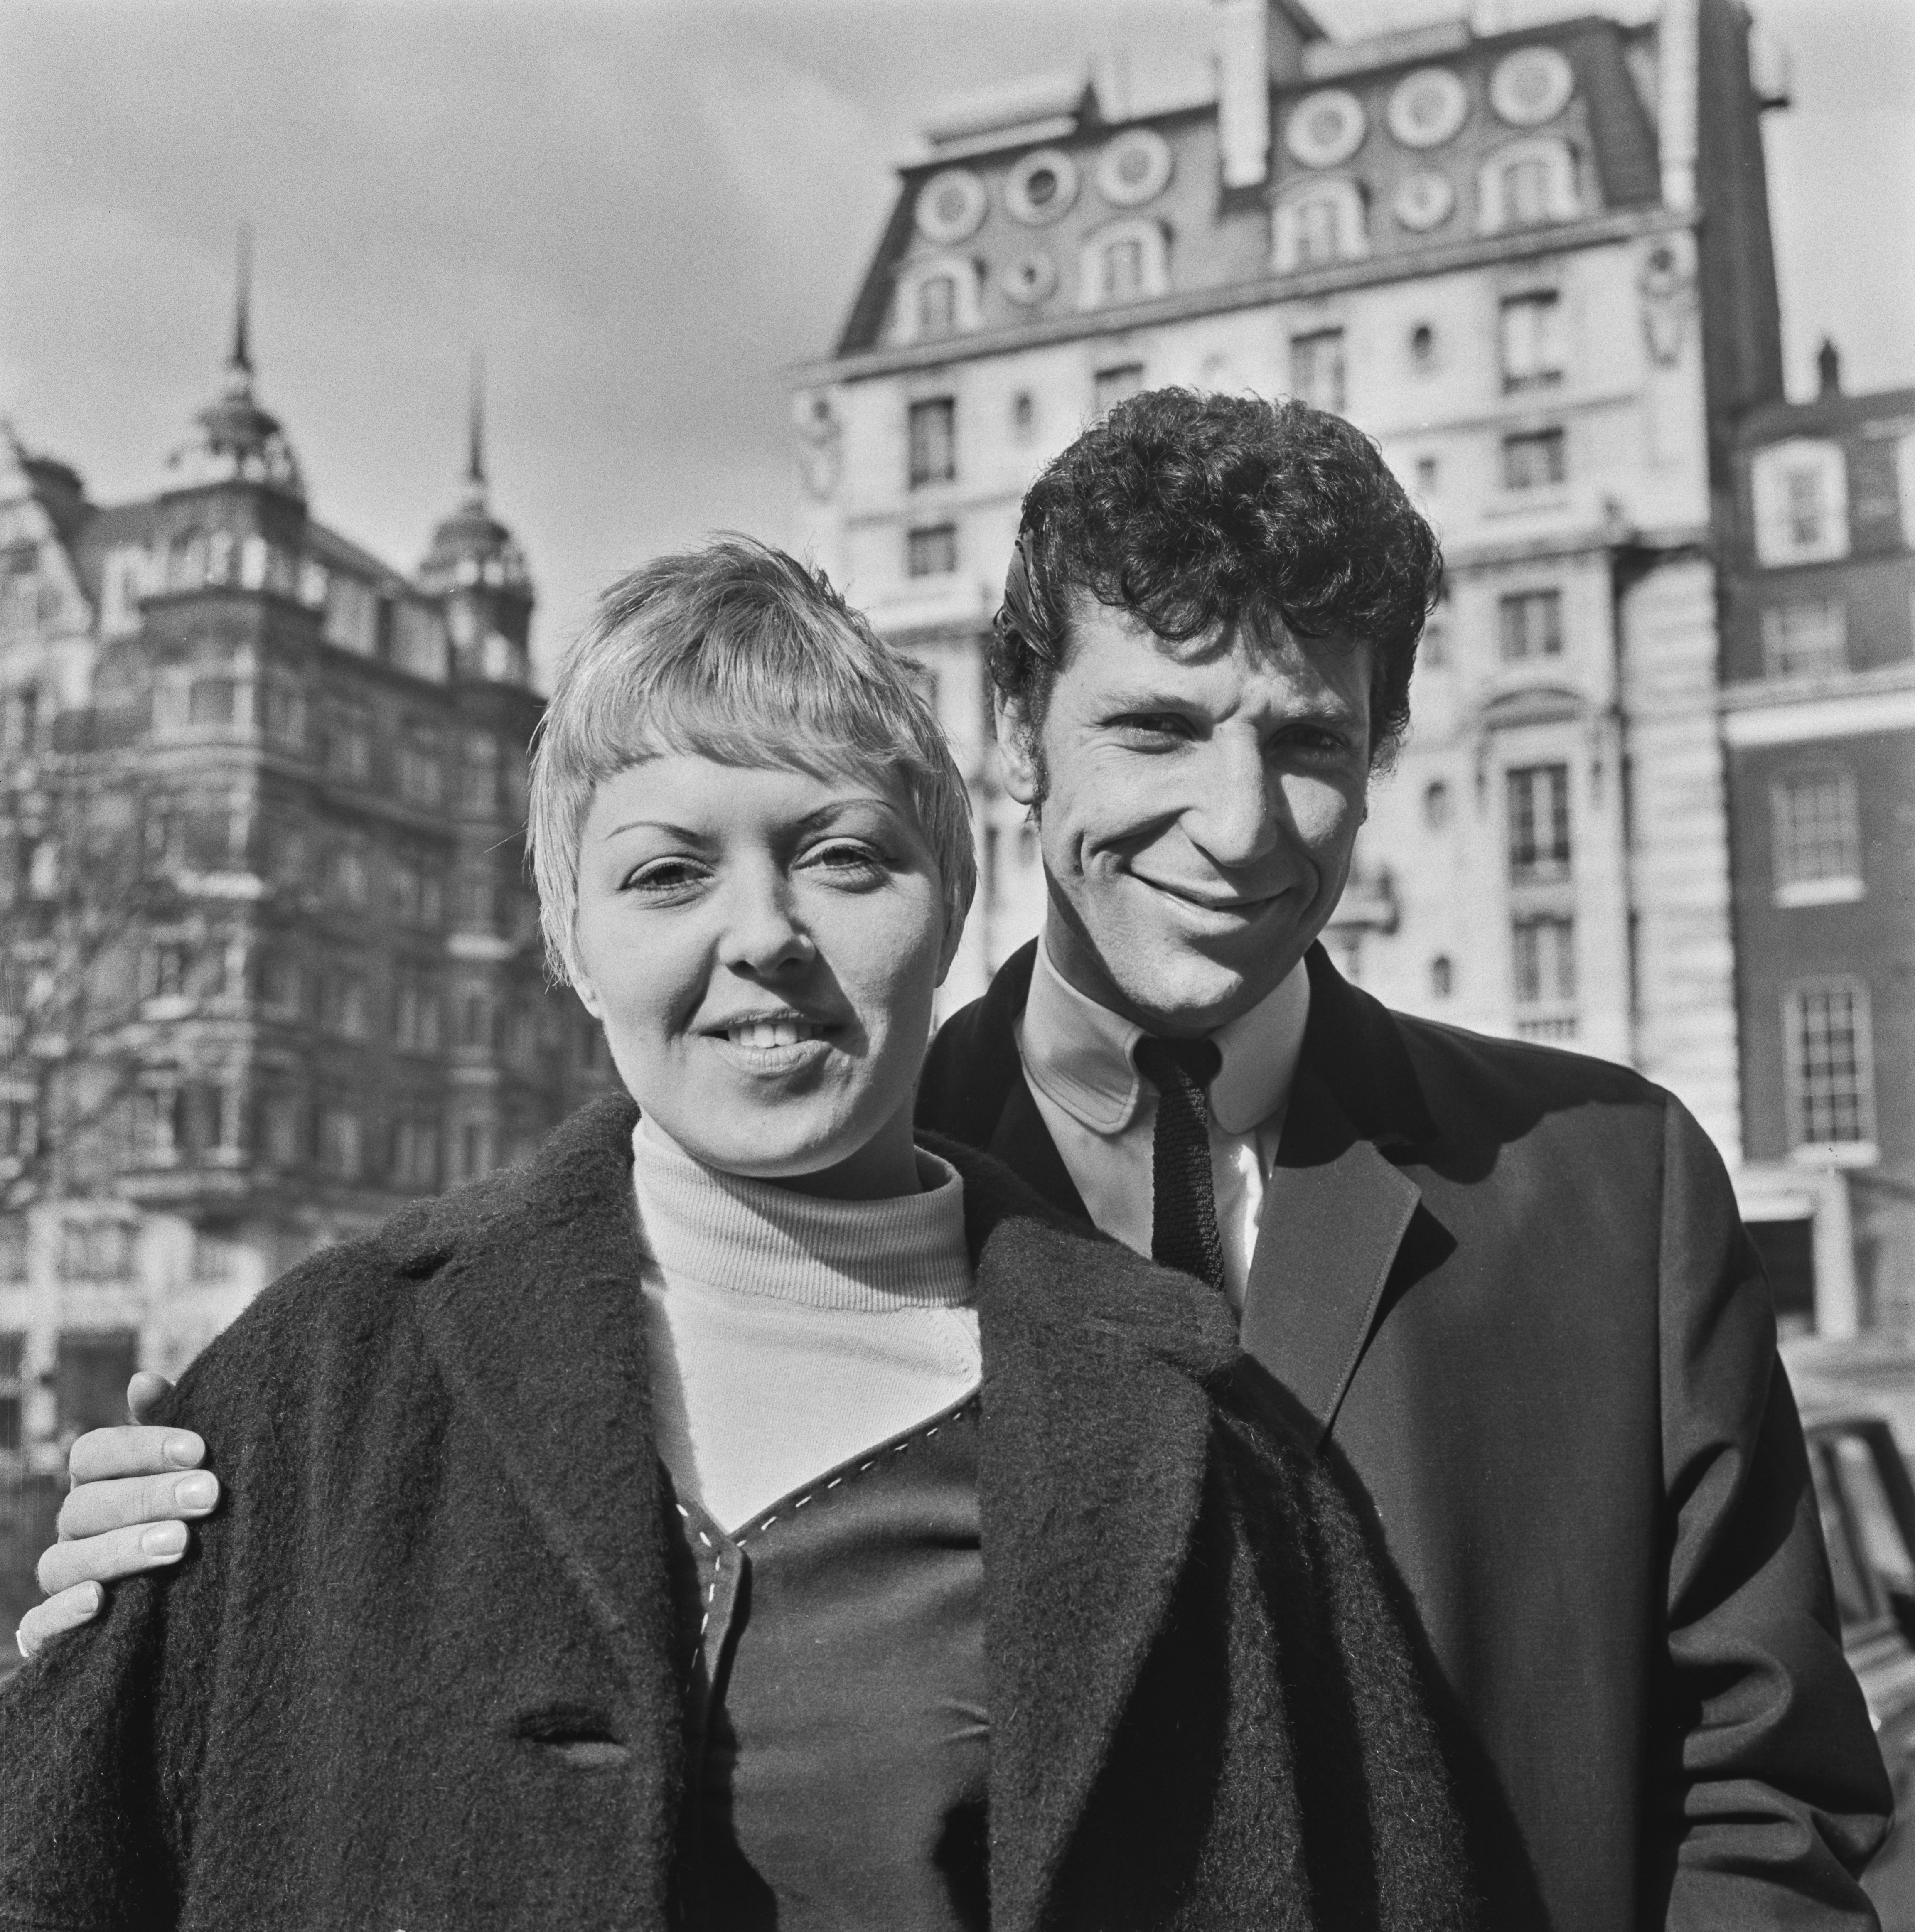 Tom Jones and Linda in Hanover Square, London on March 2, 1965 | Source: Getty Images